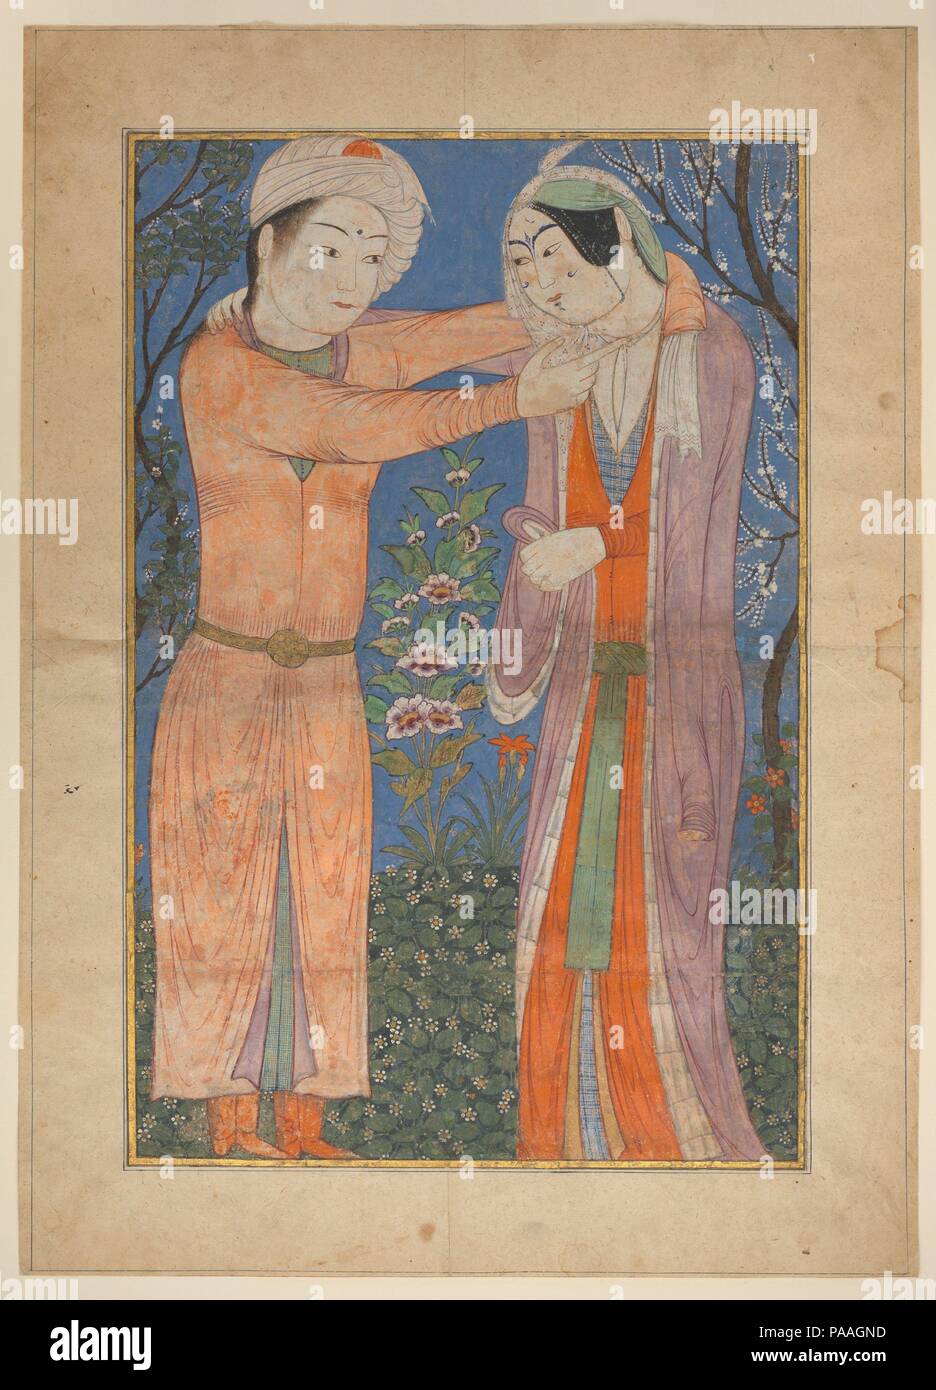 Princely Couple. Dimensions: H. 19 1/4 in. (48.9 cm)  W. 12 9/16 in. (31.9 cm). Date: 1400-1405.  Considering its unusually large scale, scholars have suggested that this painting of an embracing couple may have once served as a model for wall painting. No text is found on the painting to aid in the identification of the couple, but they have been compared to legendary lovers of Persian literature, including the characters of Khusrau and Shirin, known from the poet Nizami's Khamsa (Quintet). Museum: Metropolitan Museum of Art, New York, USA. Stock Photo